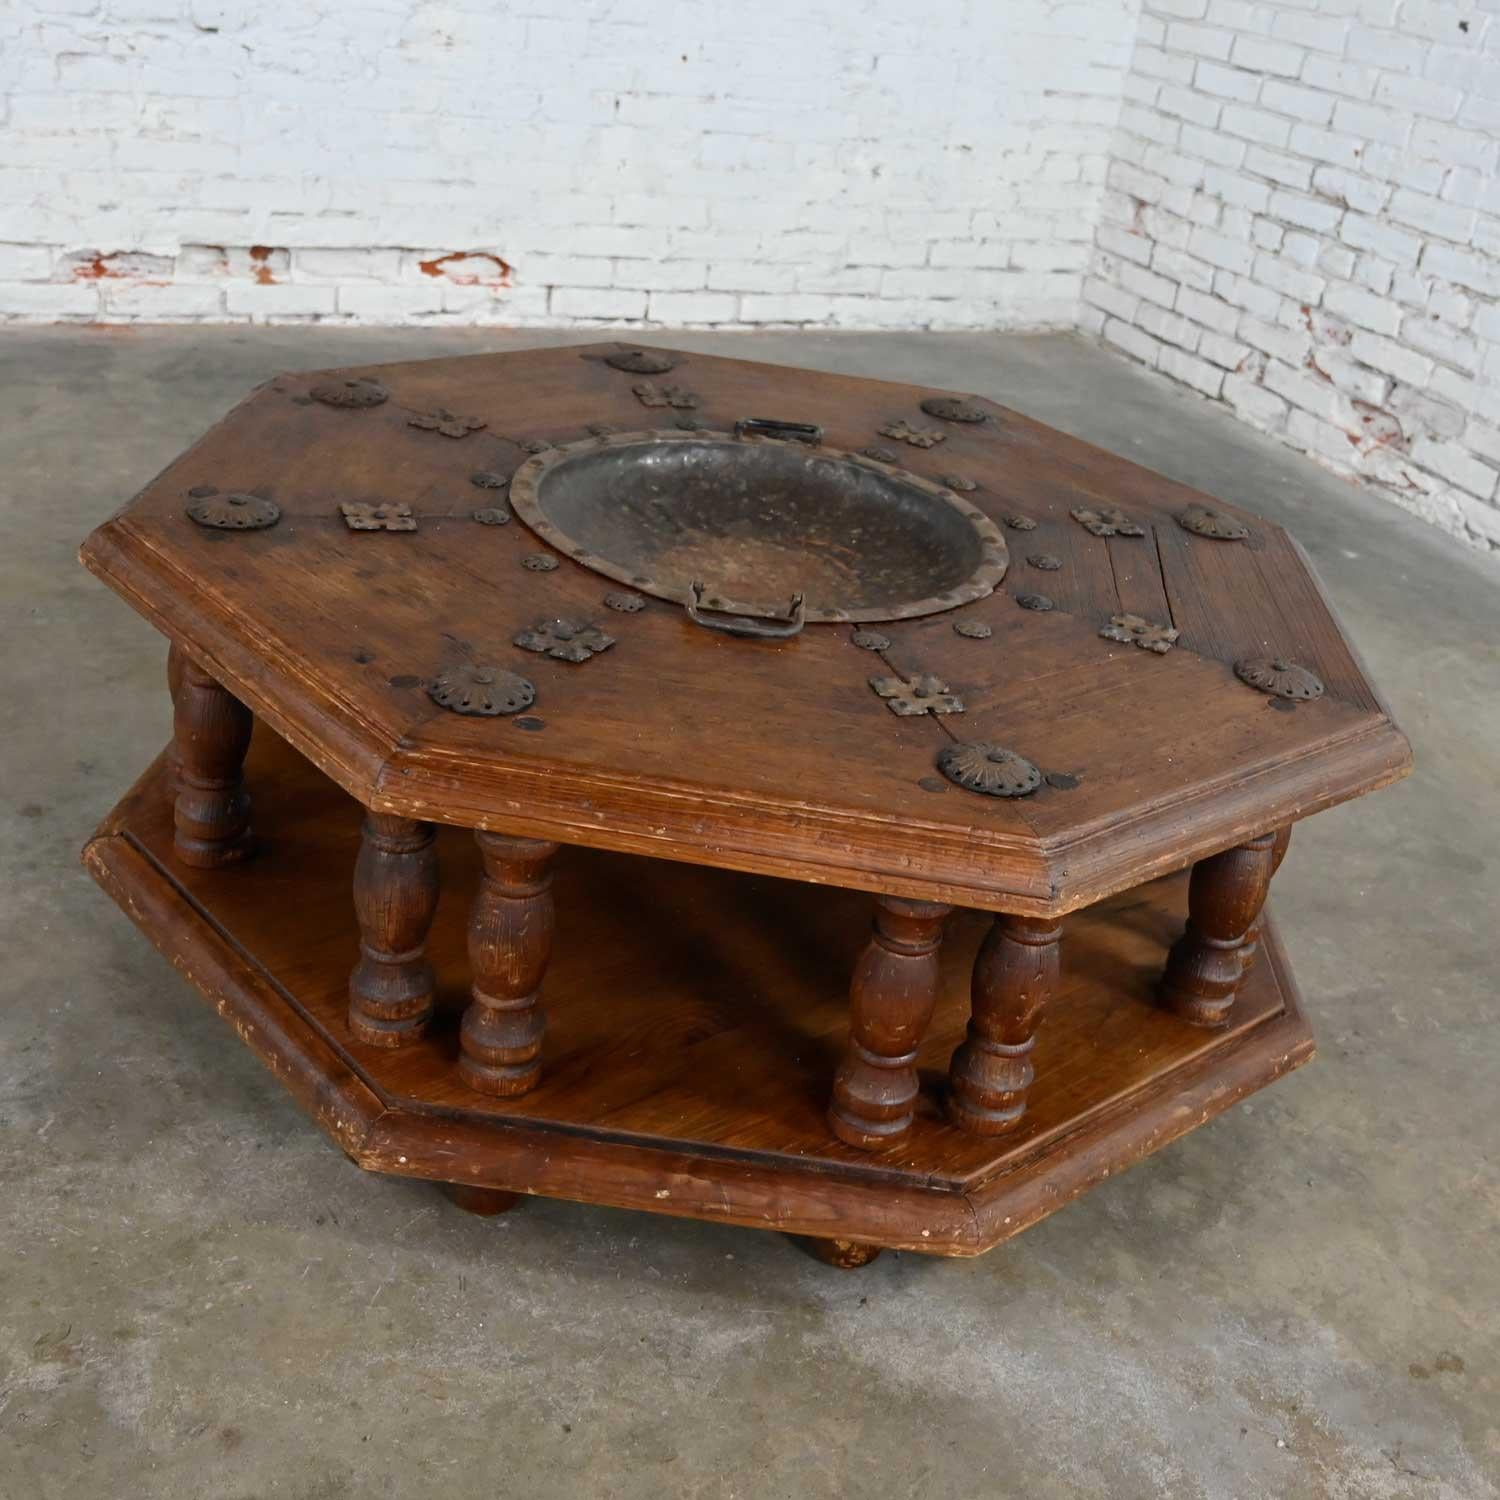 Mexican Spanish Colonial Revival Rustic Octagon Brazier Coffee Table Style Artes De Mexi